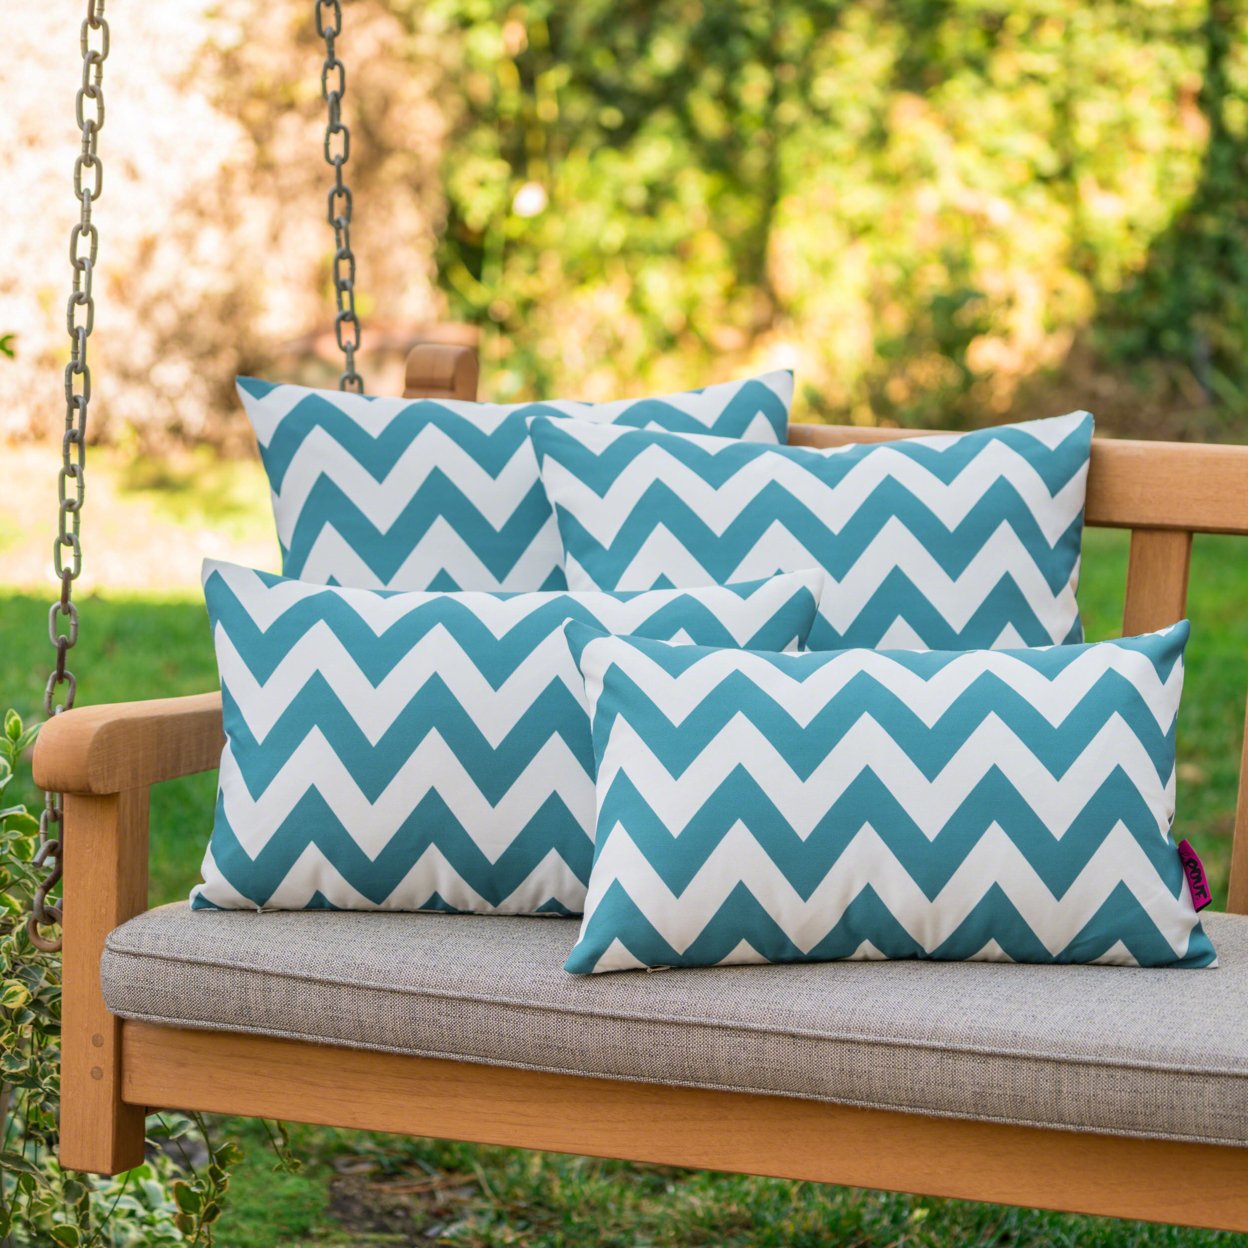 Embry Outdoor Water Resistant Square And Rectangular Pillows - Set Of 4 - Dark Teal/White